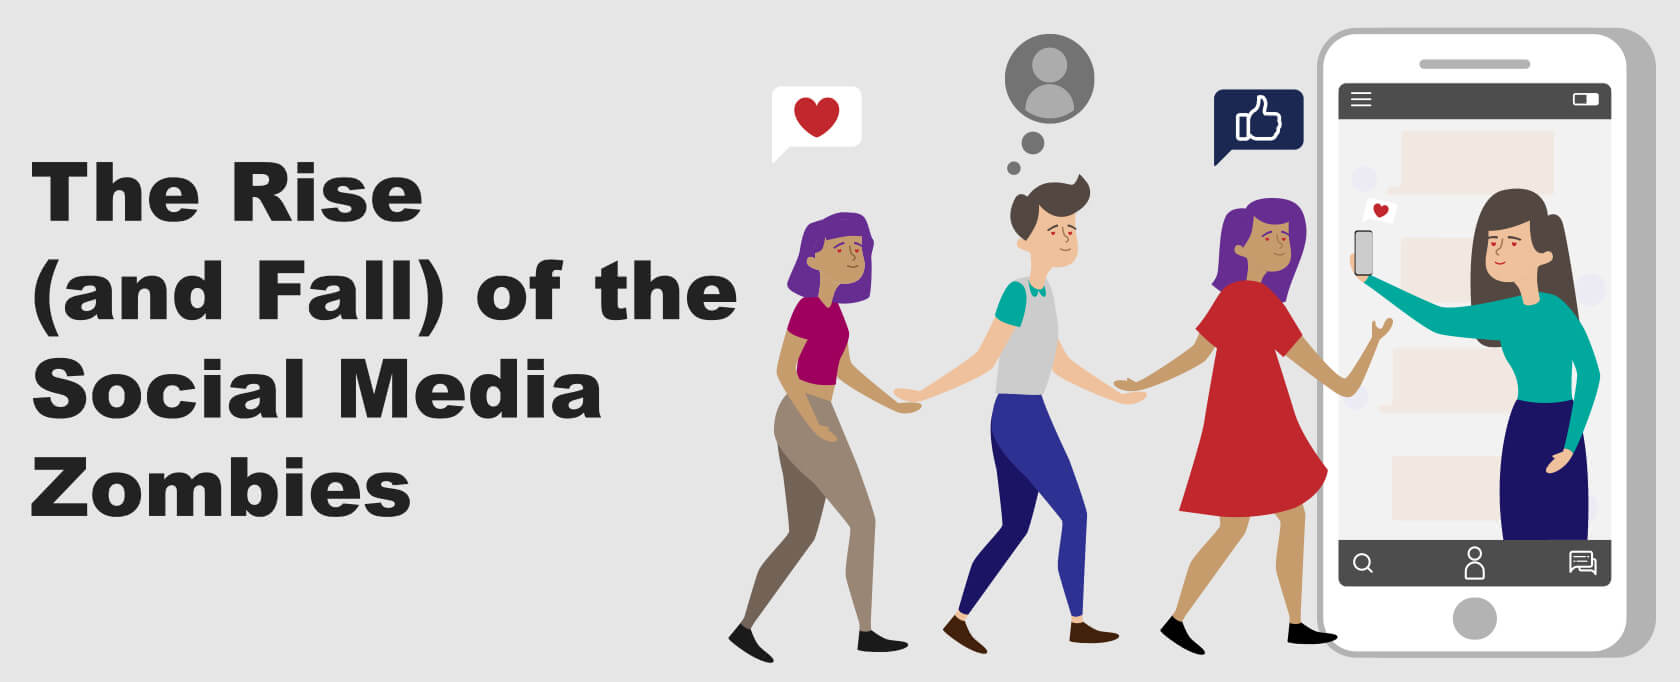 The Rise (and Fall) of the Social Media Zombies